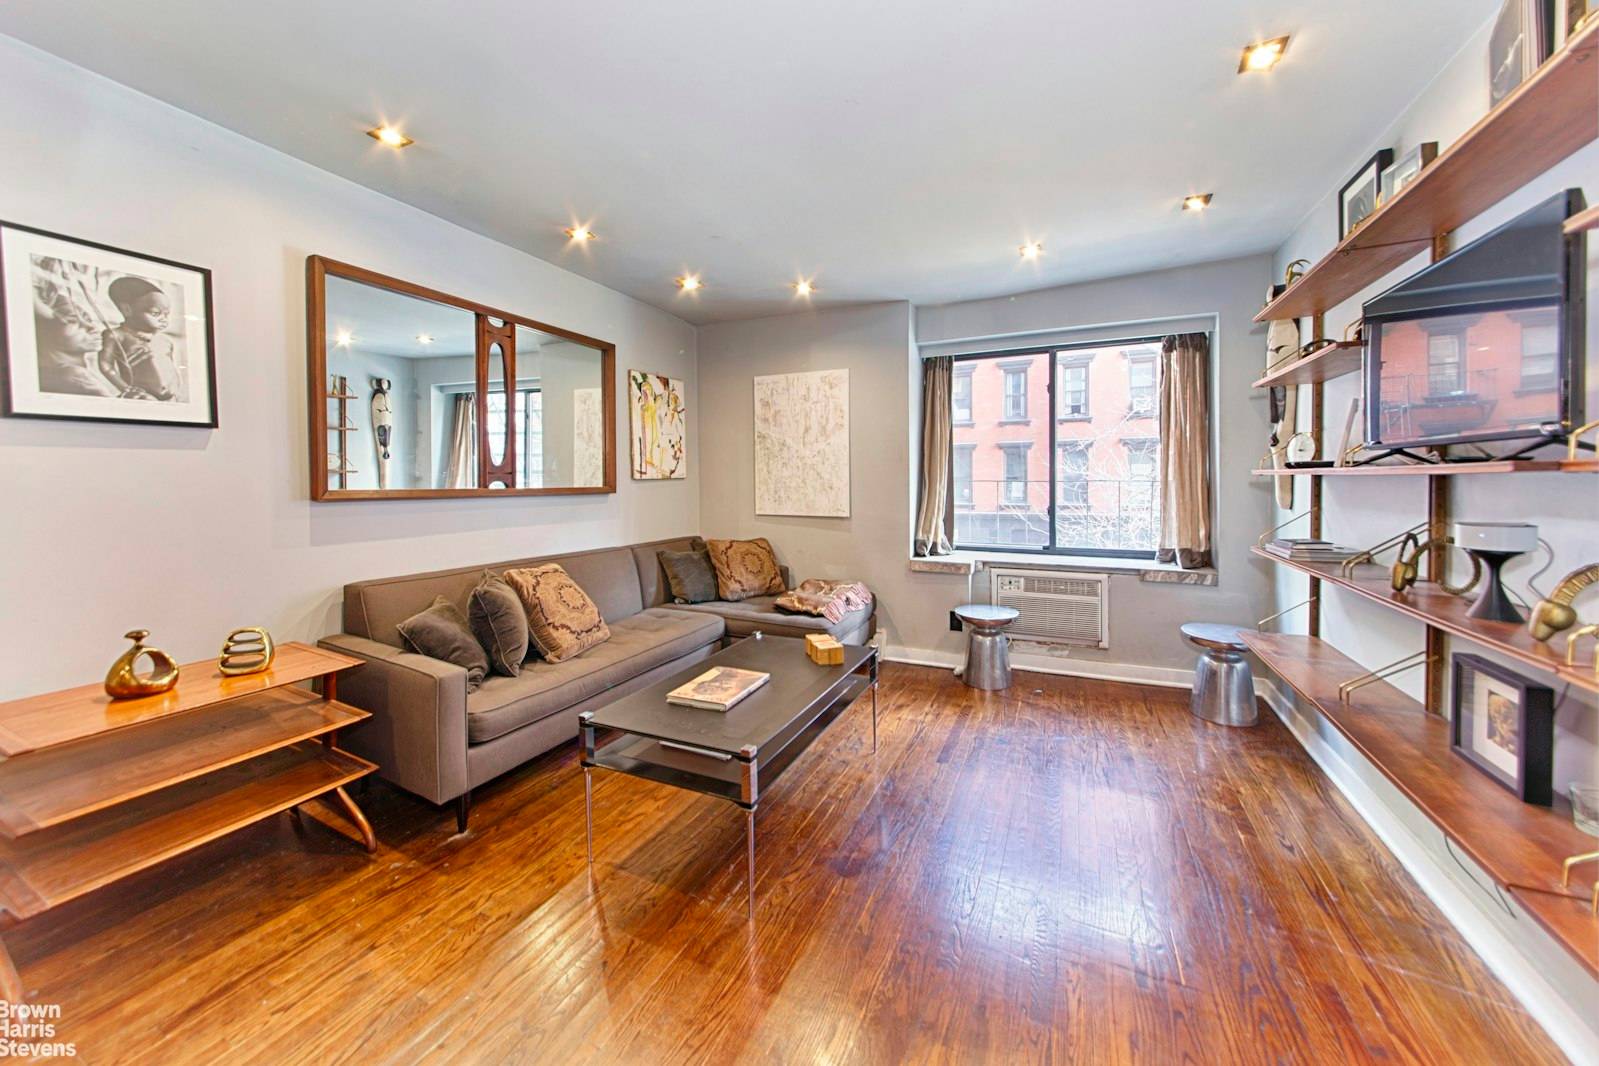 This charming and spacious apartment, having been beautifully designed and renovated, sits nestled on a quiet Gramercy street.